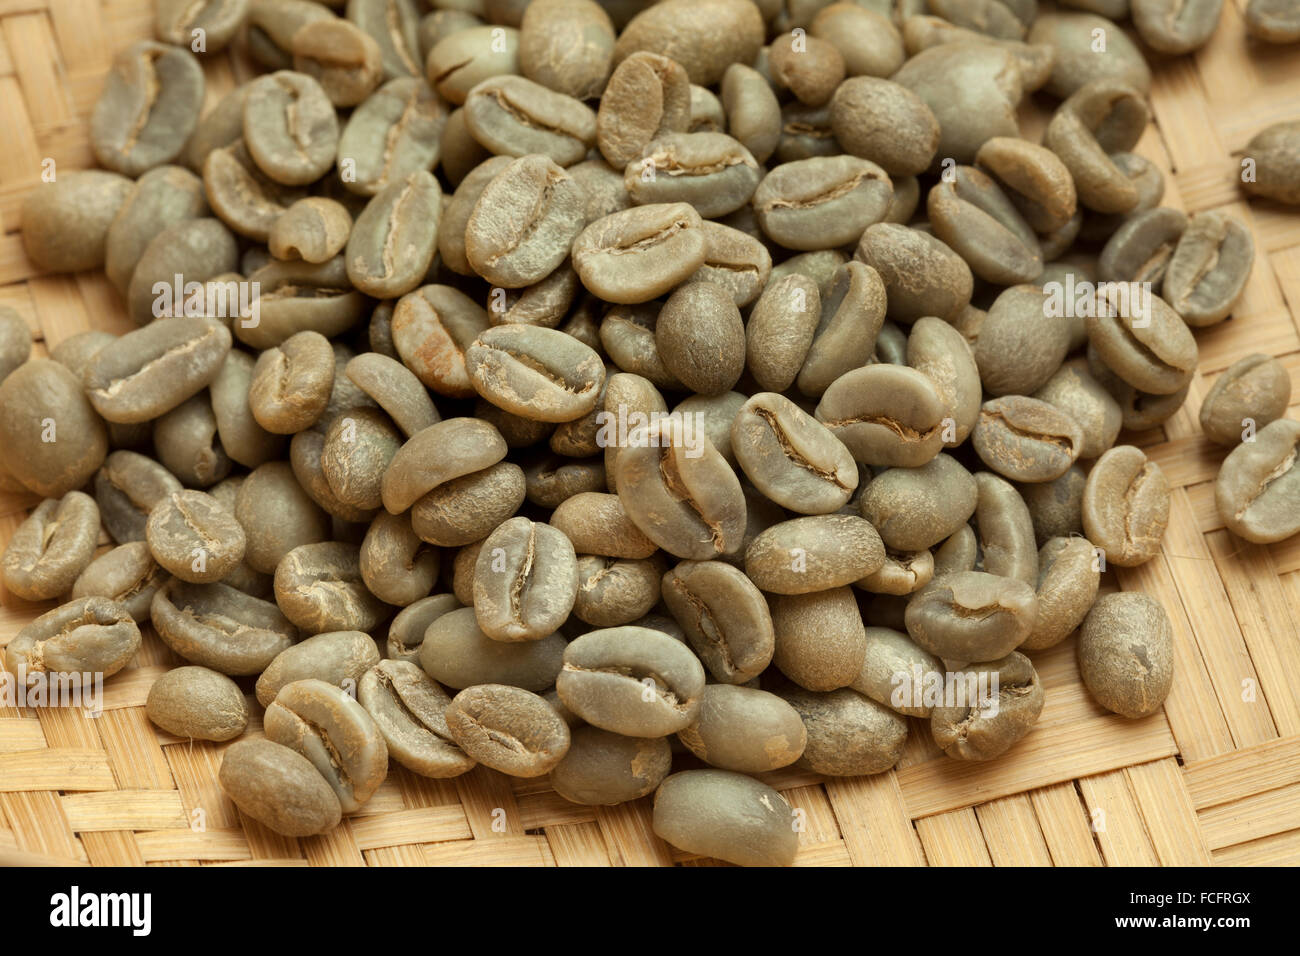 Heap of Bolivian Yanaloma green unroasted coffee beans close up Stock Photo